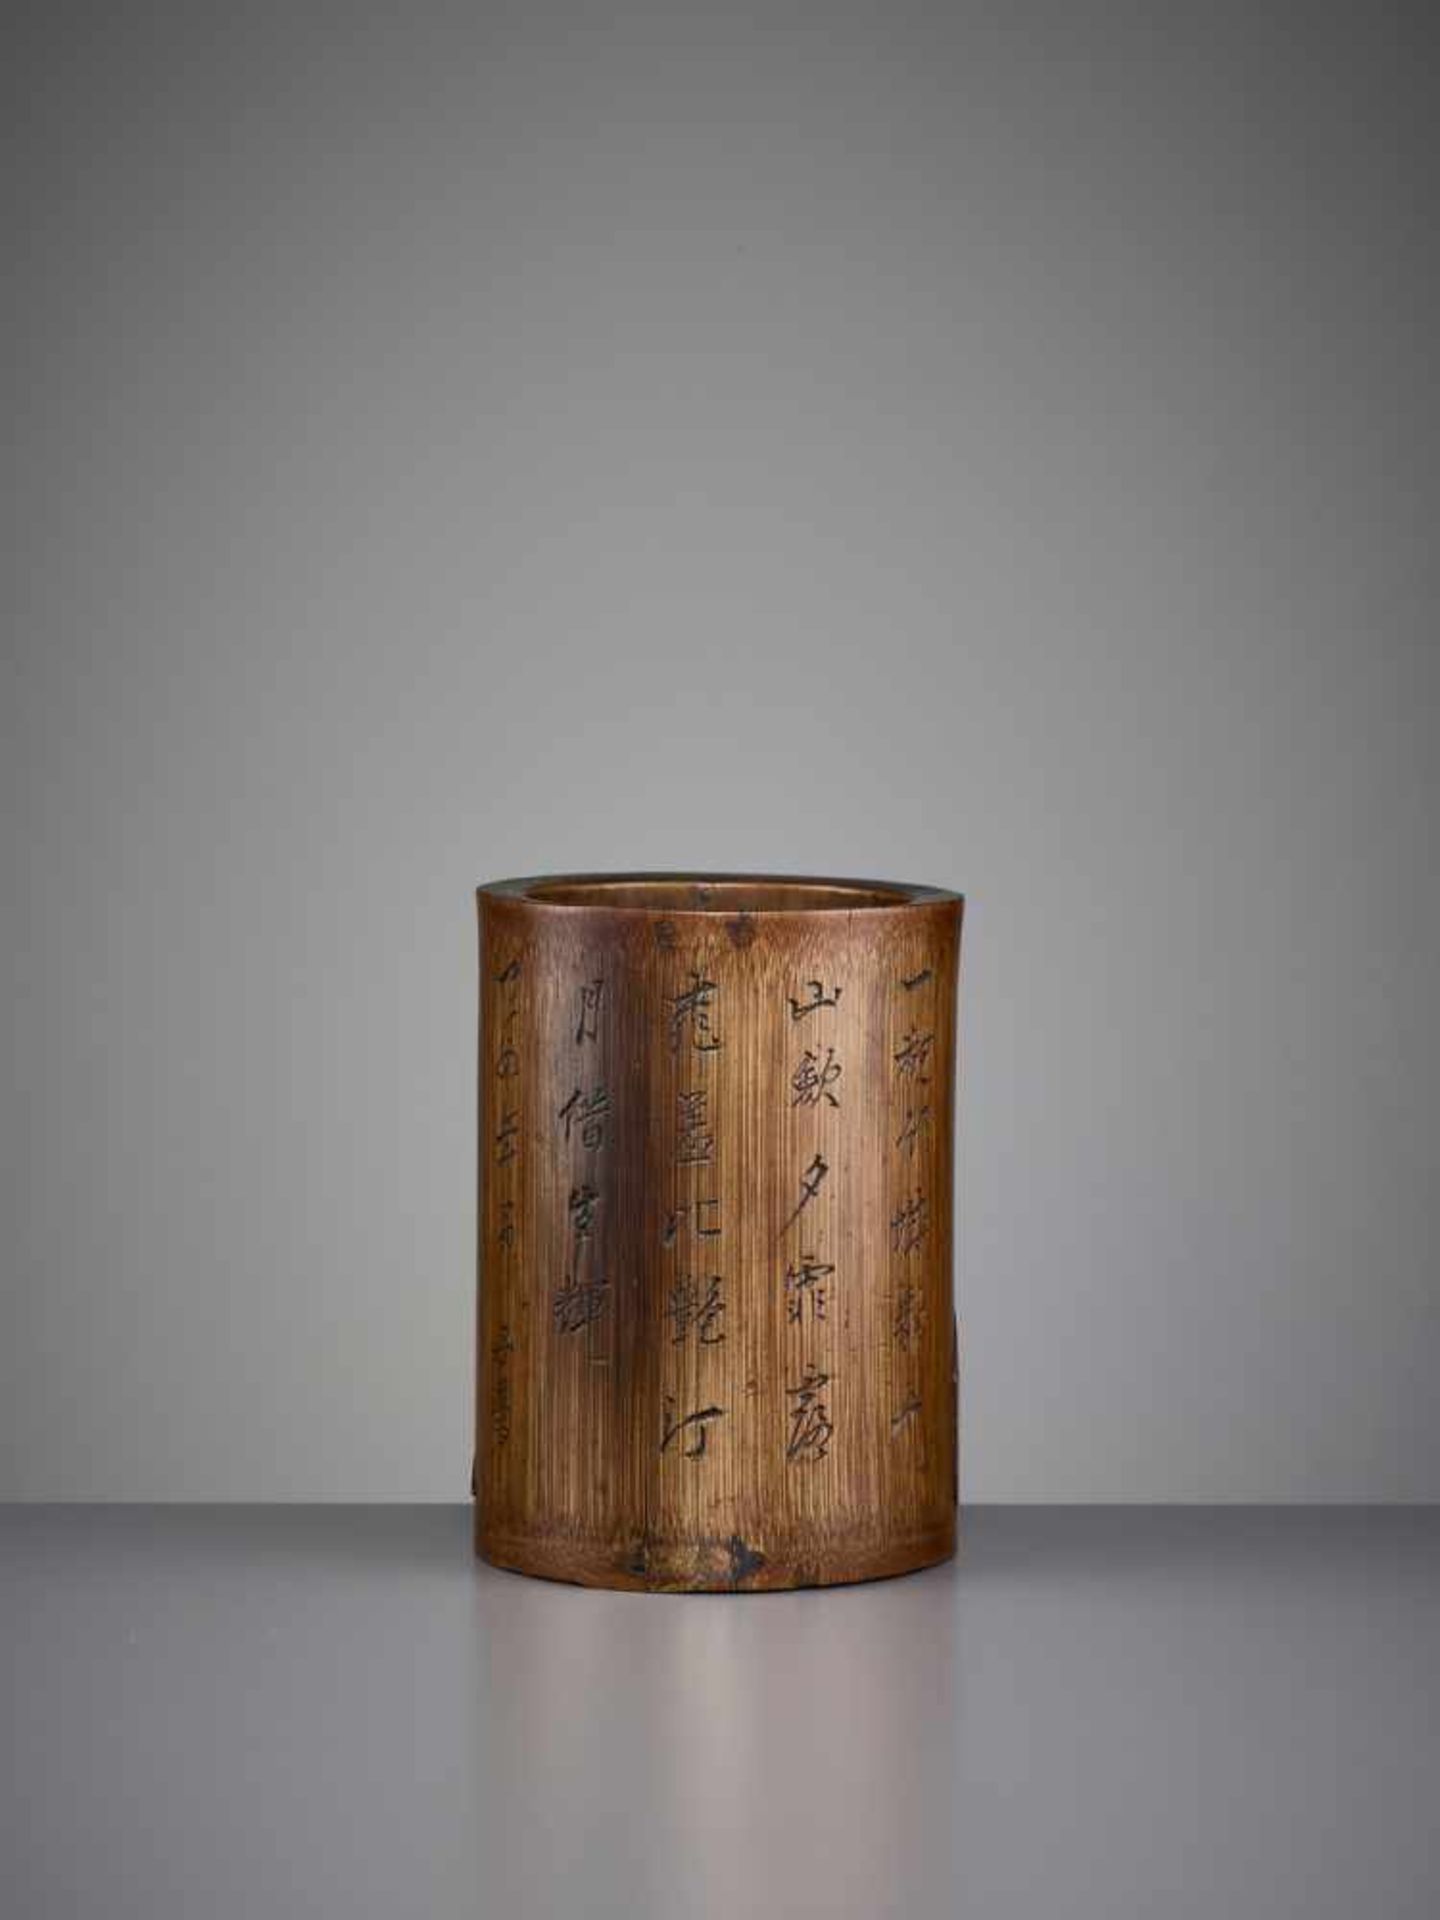 A BAMBOO BRUSHPOT 17TH/18TH CENTURY China. Of cylindrical form, the exterior well carved in - Image 4 of 10